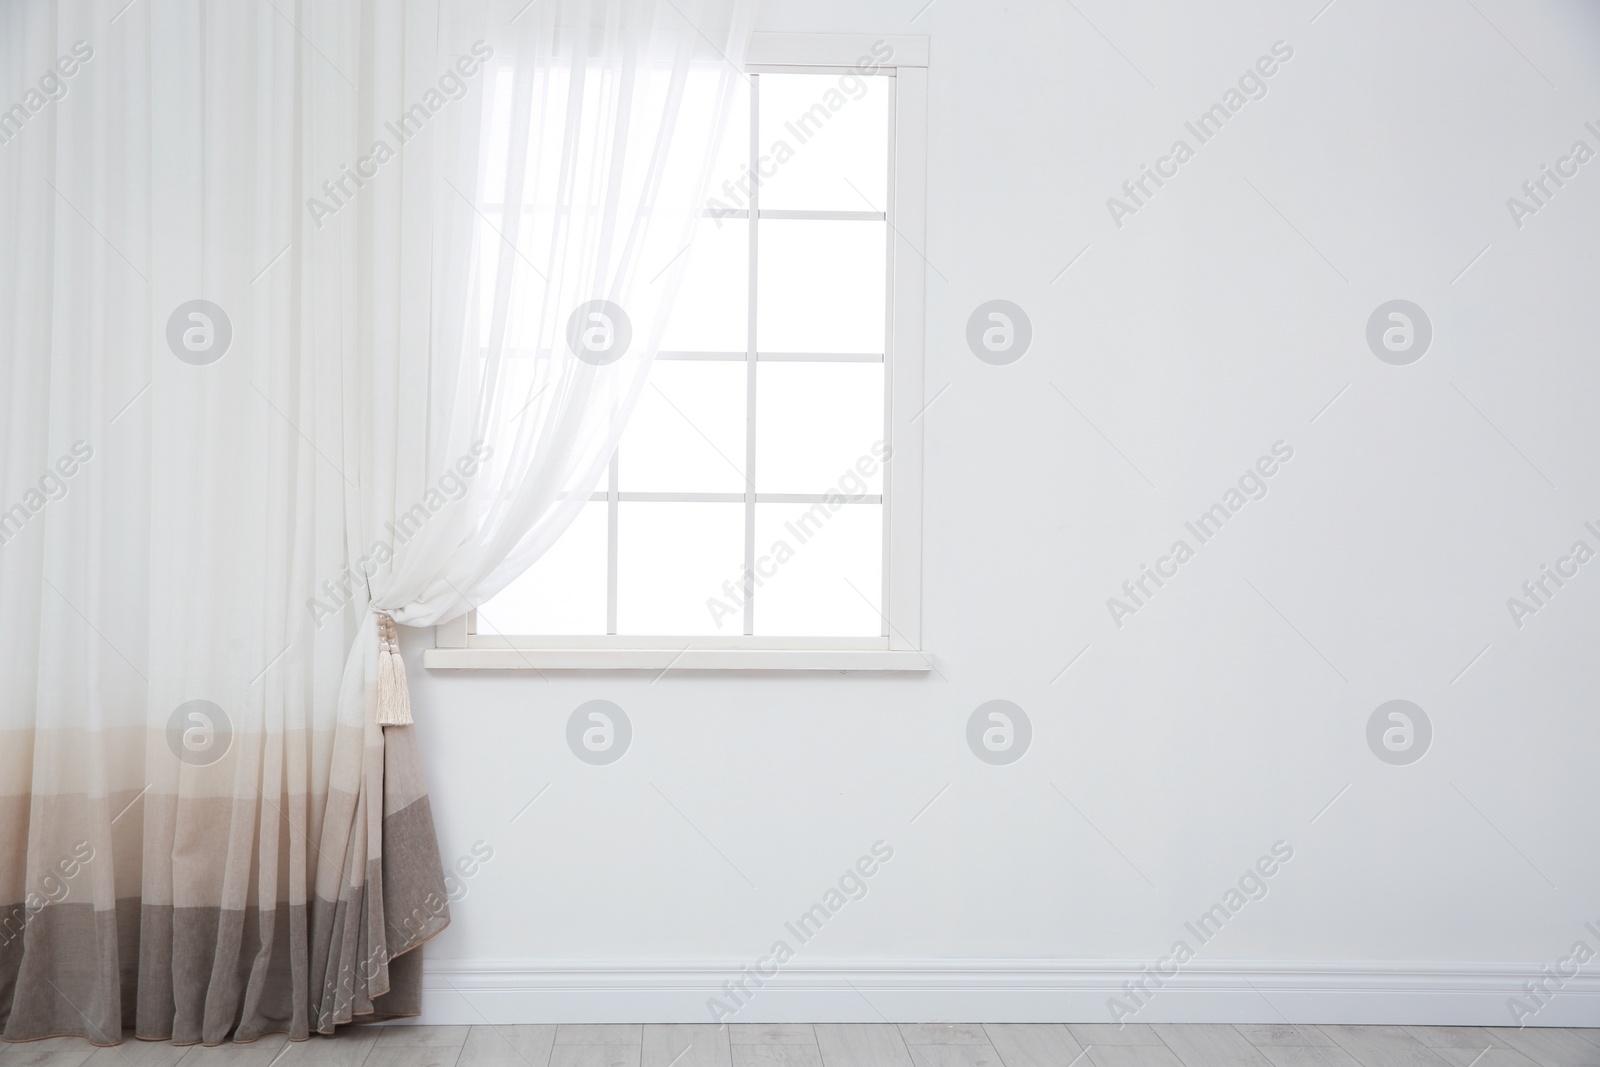 Photo of Modern window with curtain in room, space for text. Home interior